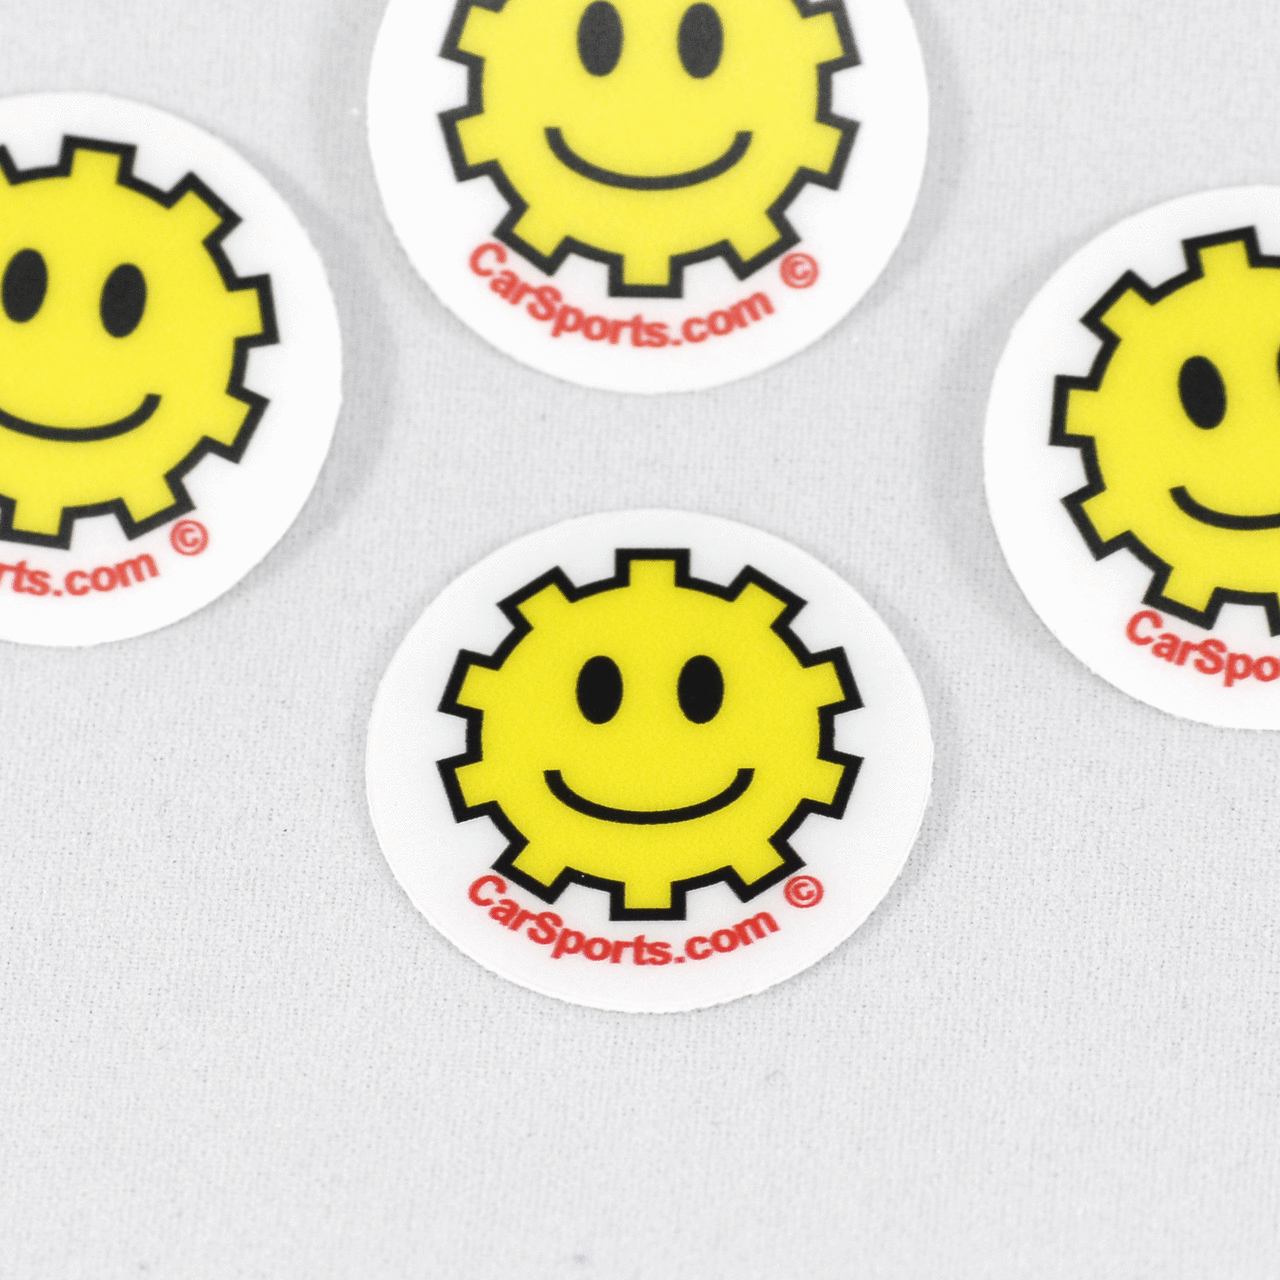 CarSports.com Gearhead Smiley Decal Stickers Set of 4 -- FREE Shipping